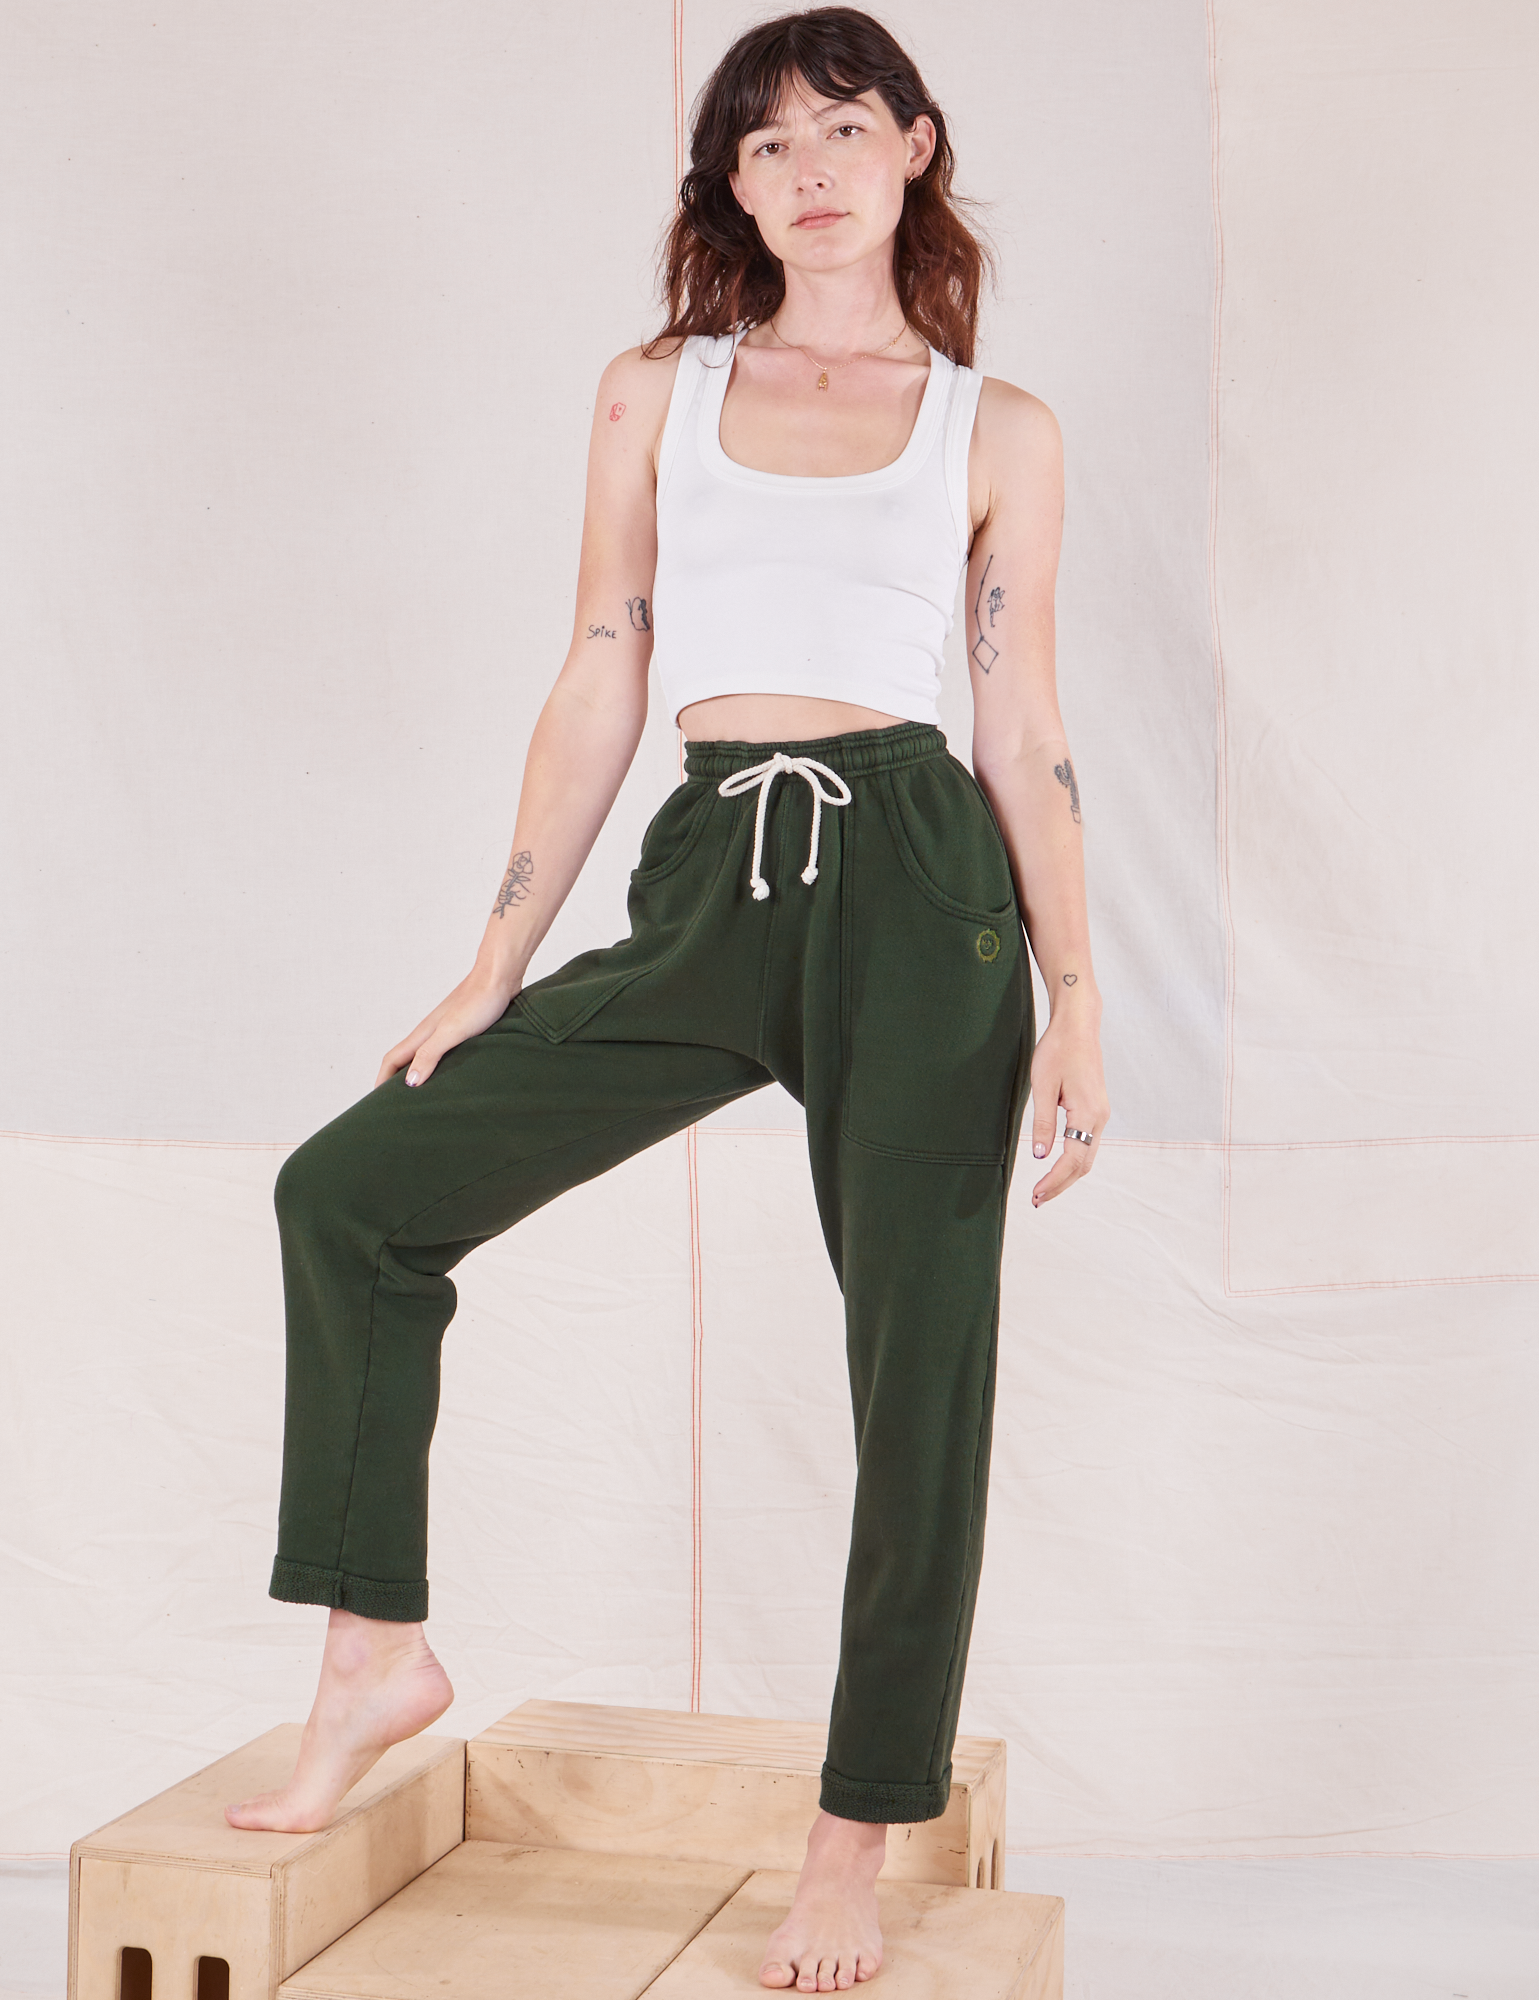 Alex is wearing Rolled Cuff Sweat Pants in Swamp Green and vintage off-white Cropped Tank